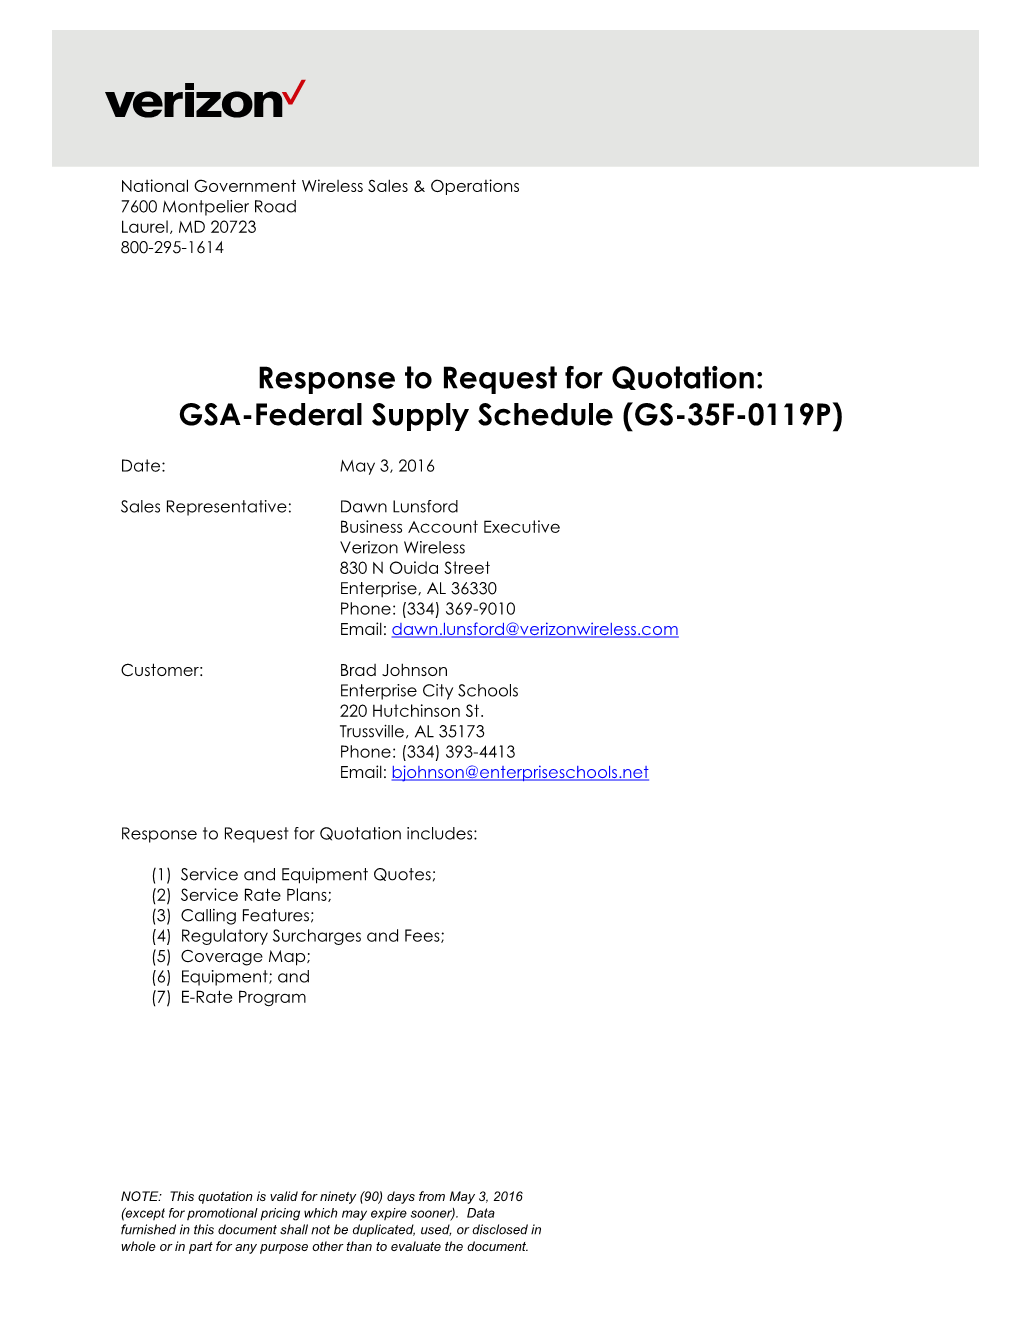 Response to Request for Quotation: GSA-Federal Supply Schedule (GS-35F-0119P)